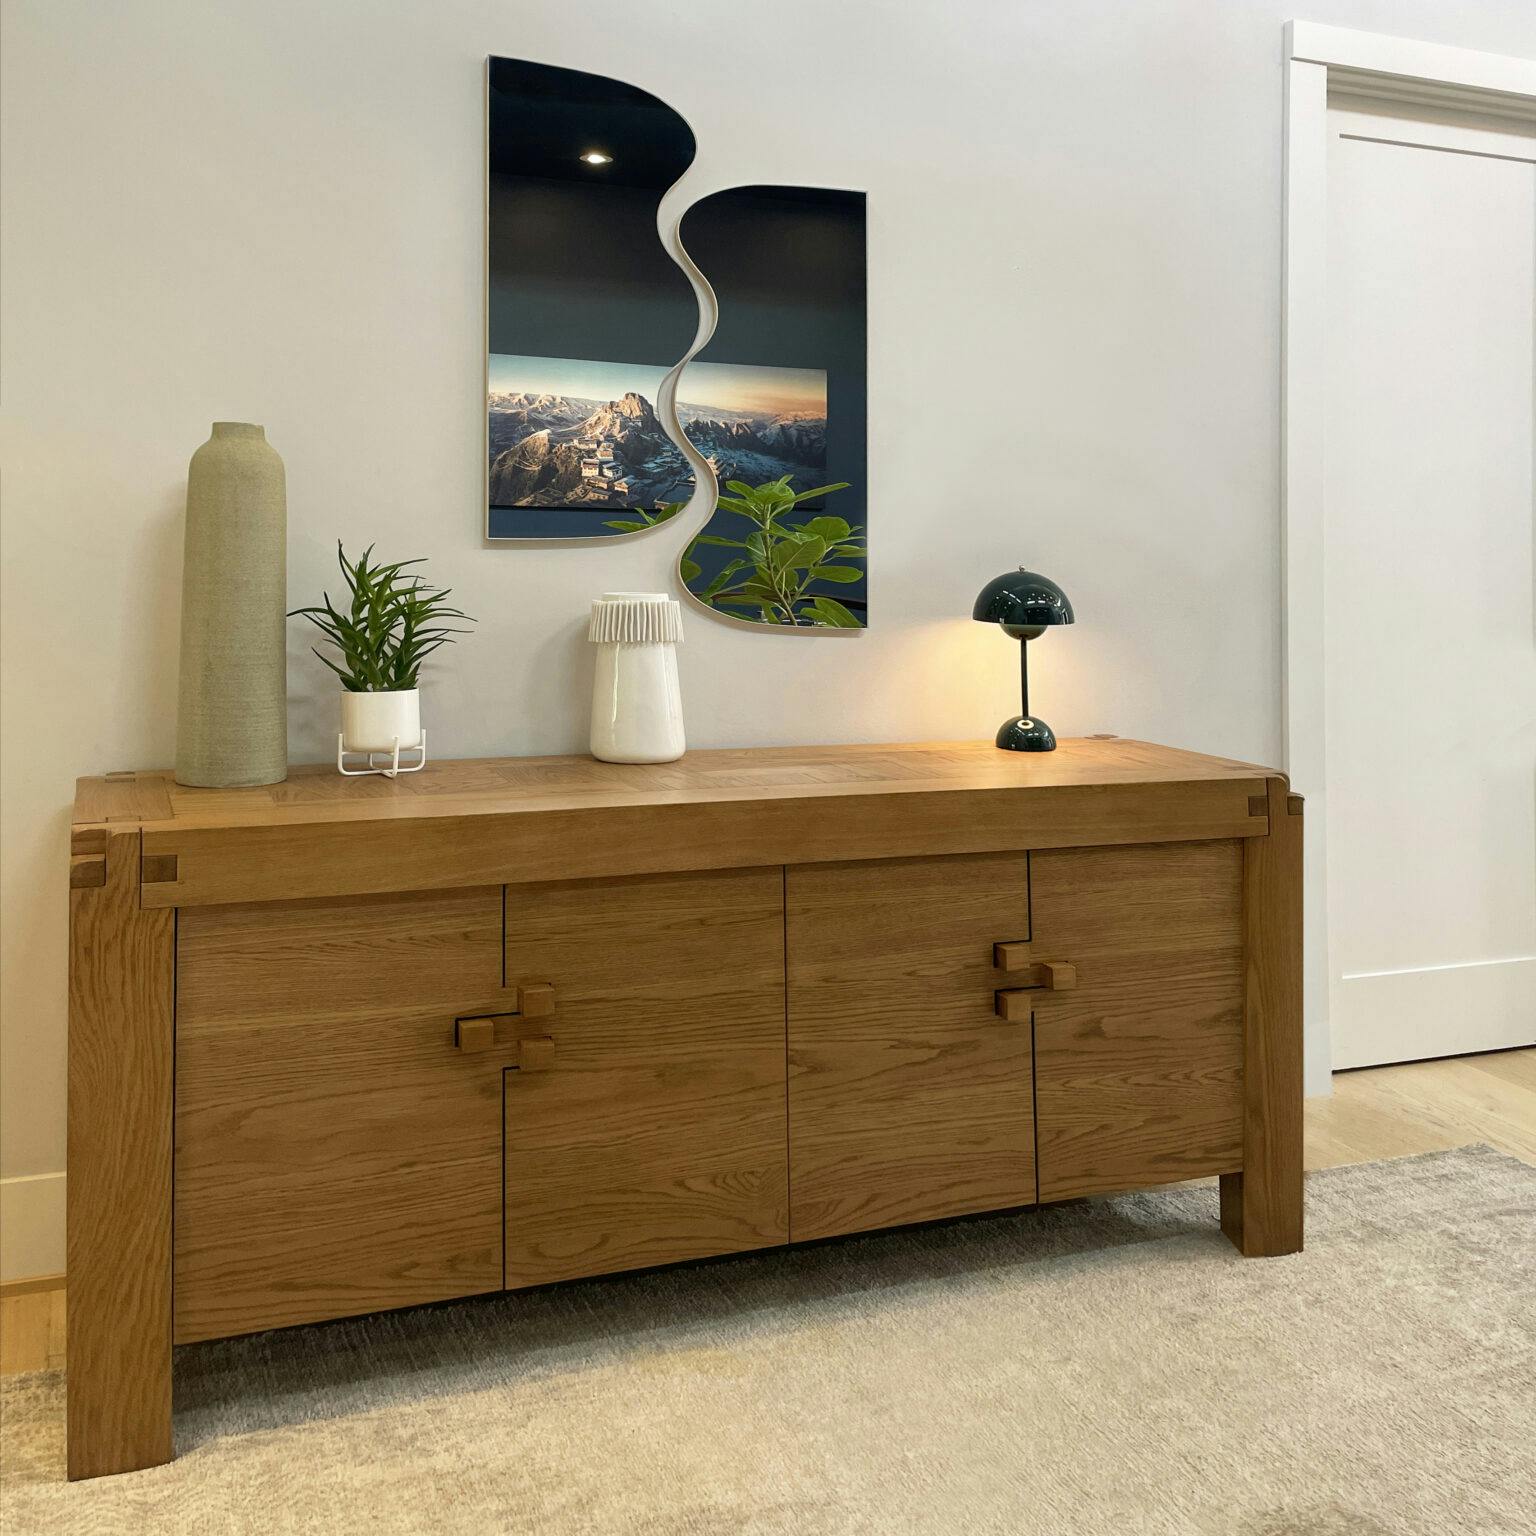 This gorgeous white oak sideboard with its Japanese joinery was perfect for this hallway.